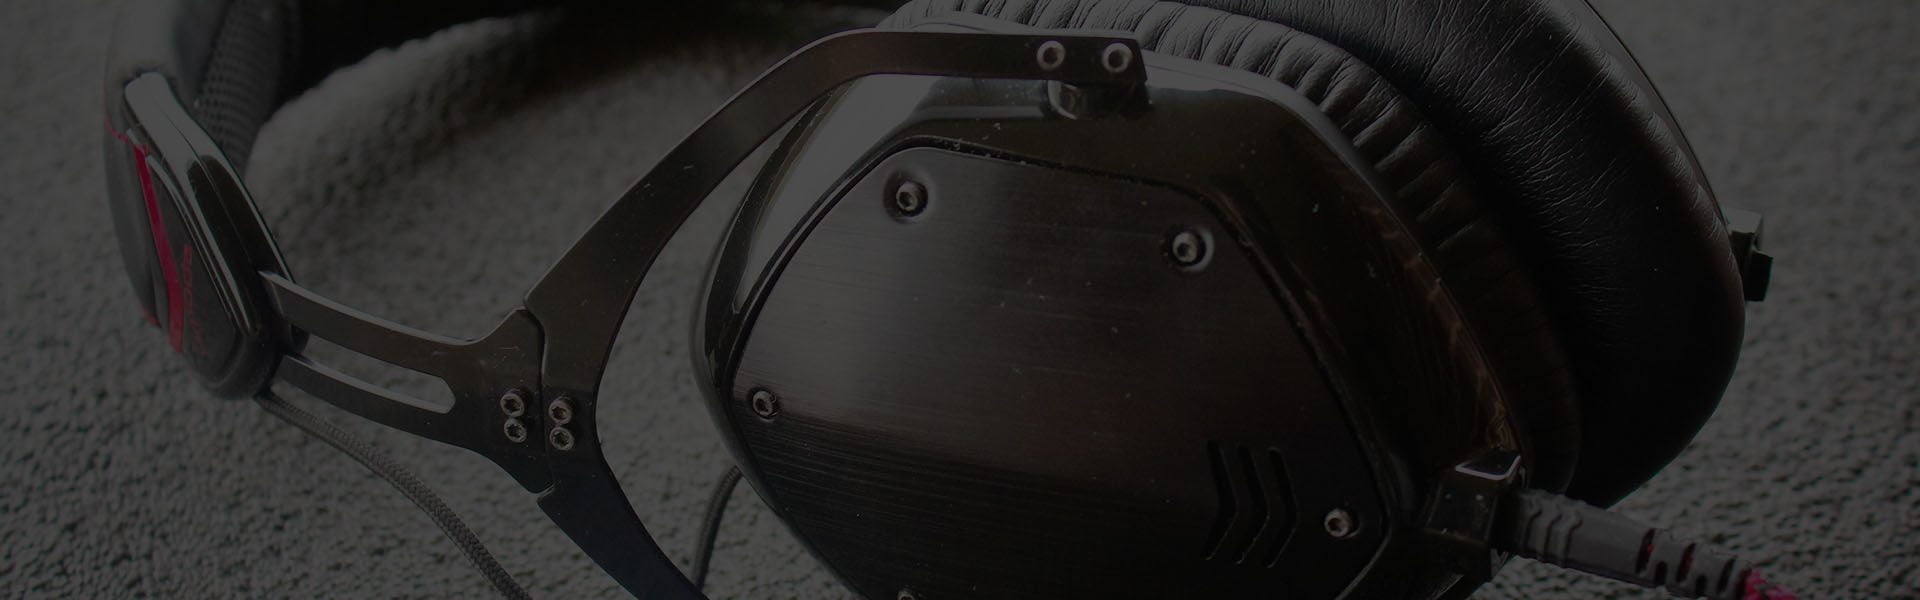 V-MODA: M-100, a Robust Headphone with Cutting-edge Features 13